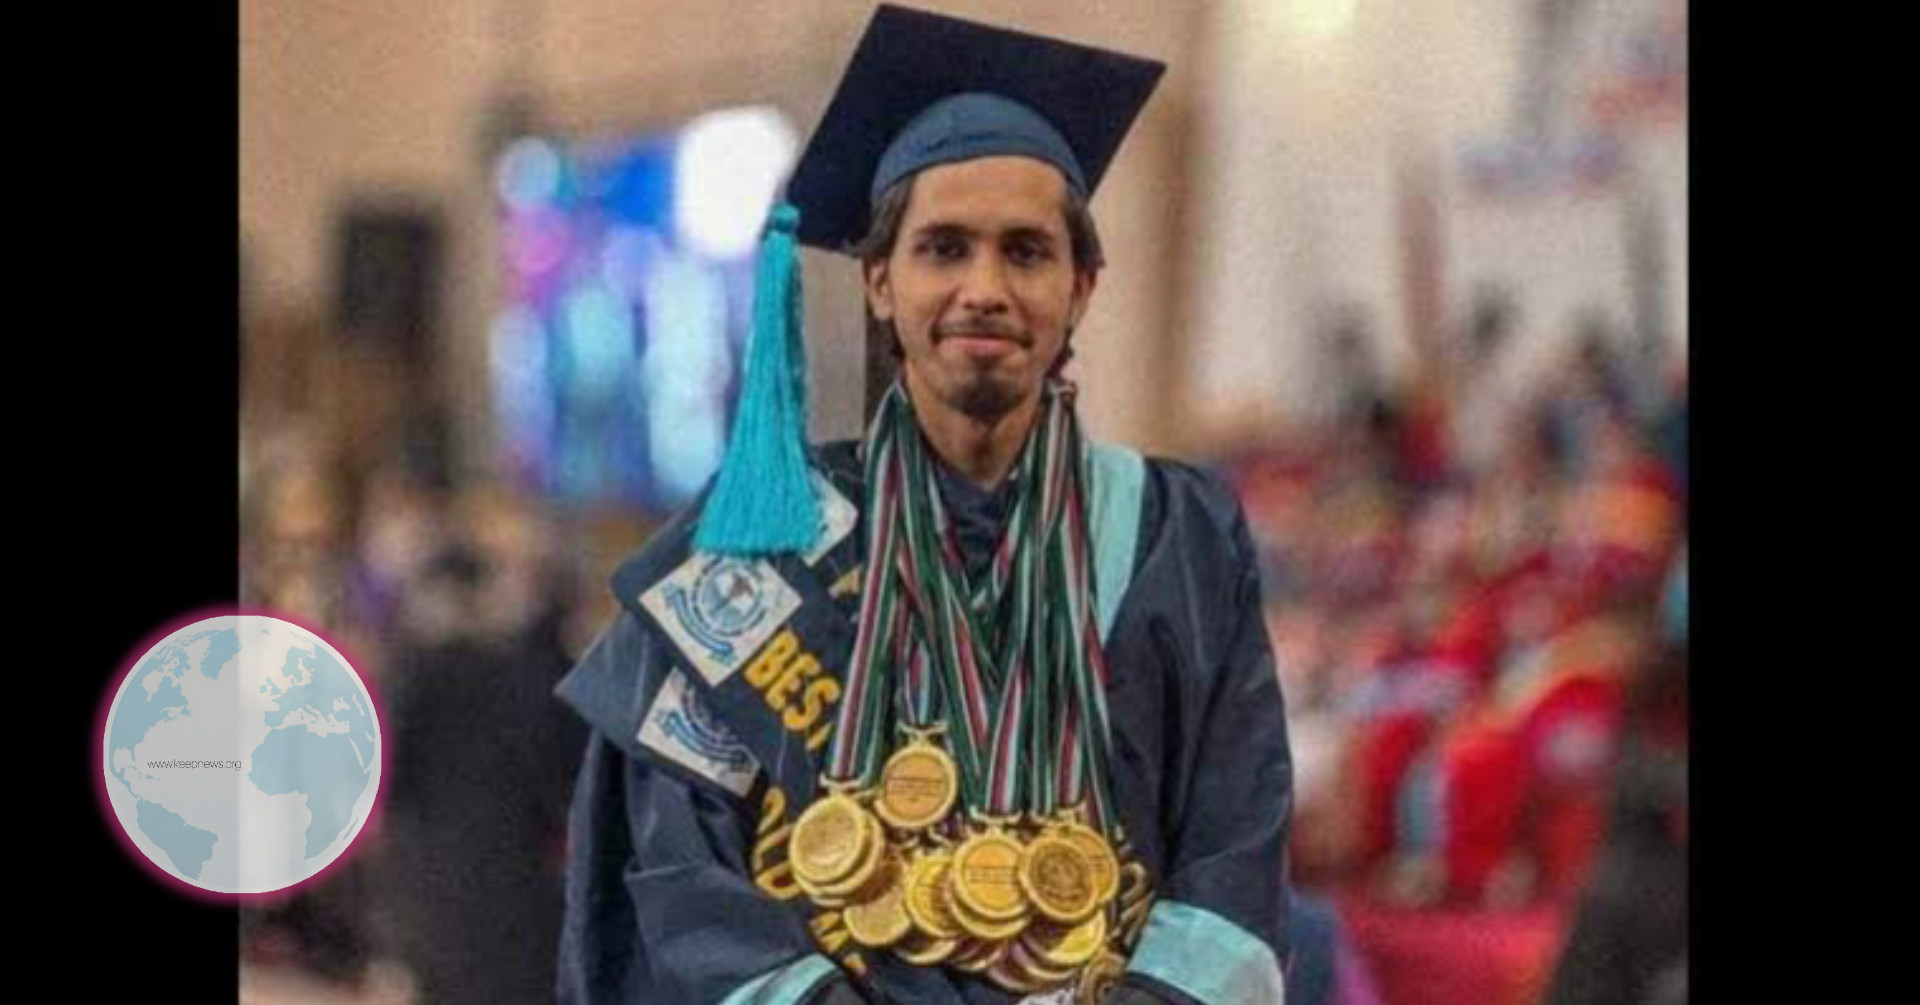 A Student from Pakistan Created a New Record by Taking 29 Gold Medals